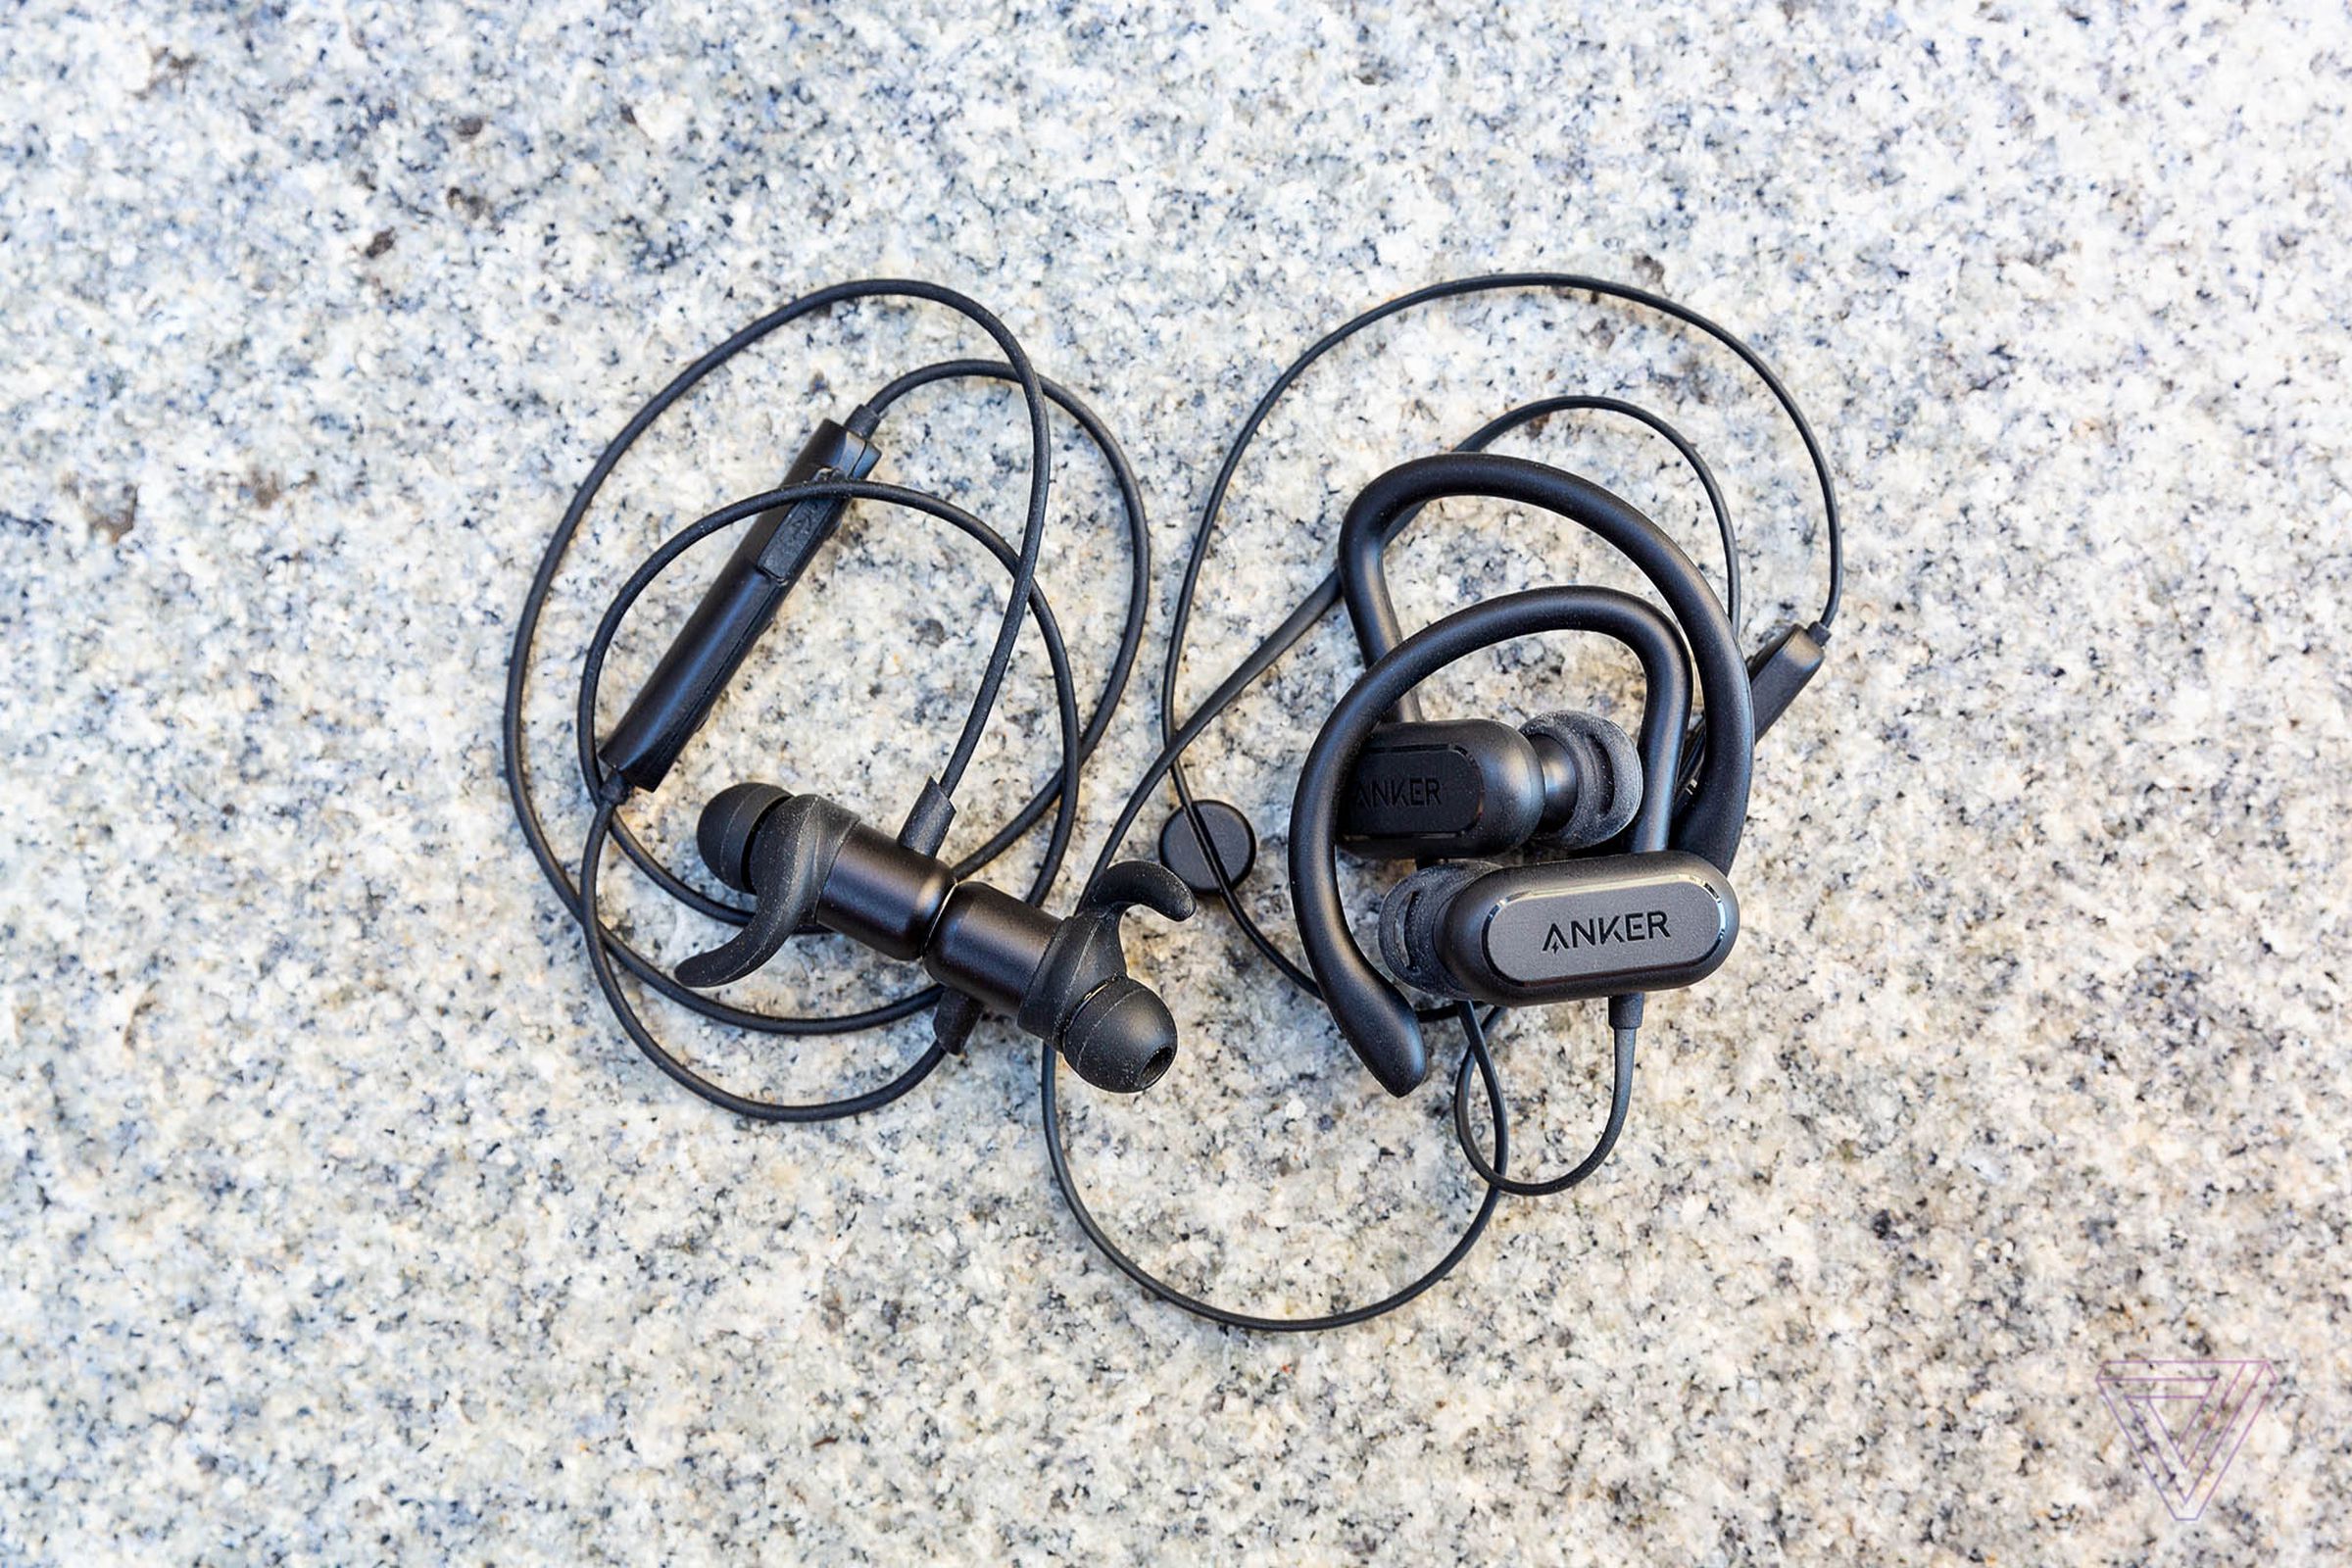 The Soundcore Spirit, pictured on the left, and Spirit X earbuds.